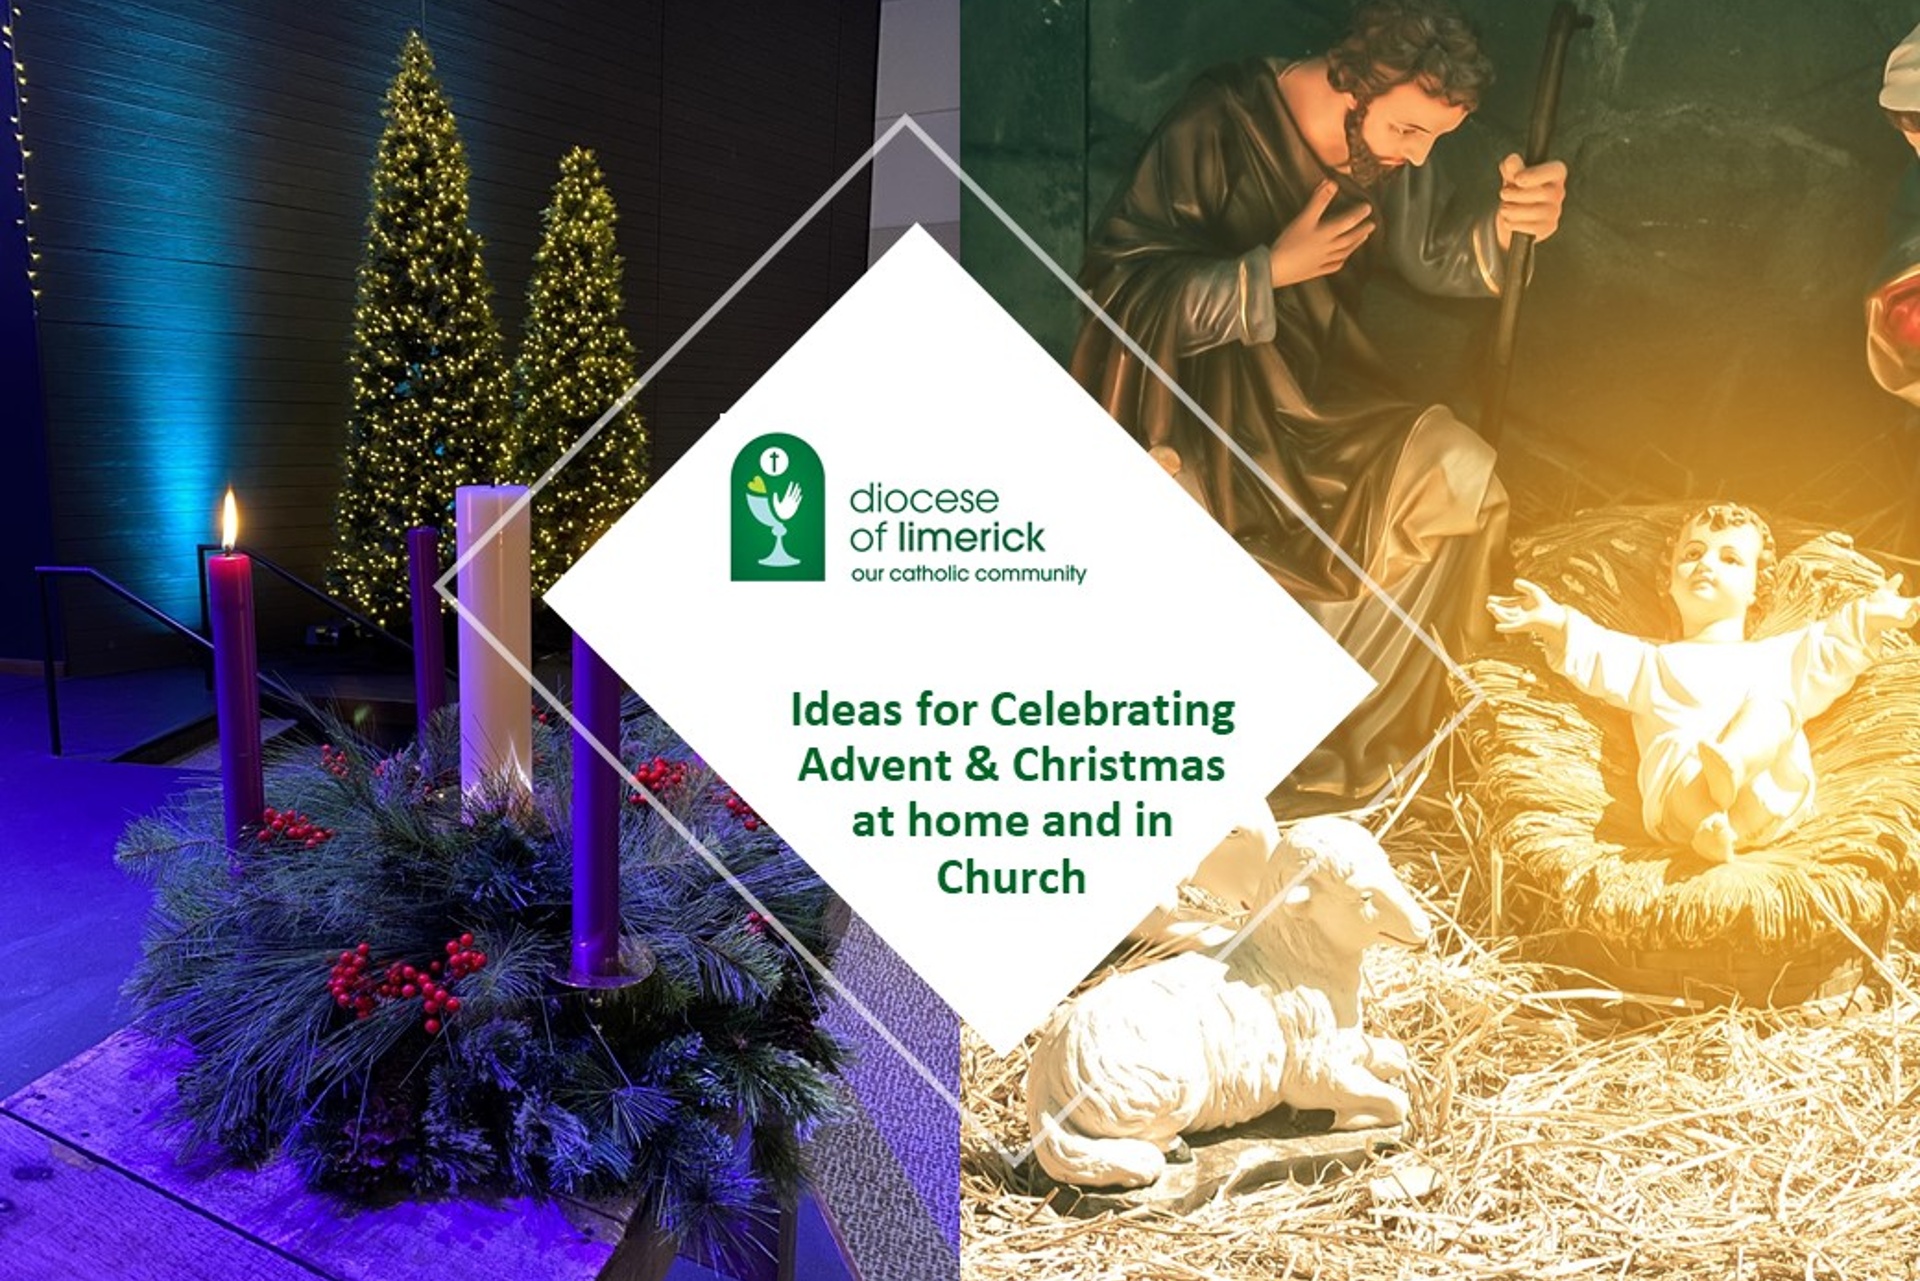 Resources for Advent and Christmas